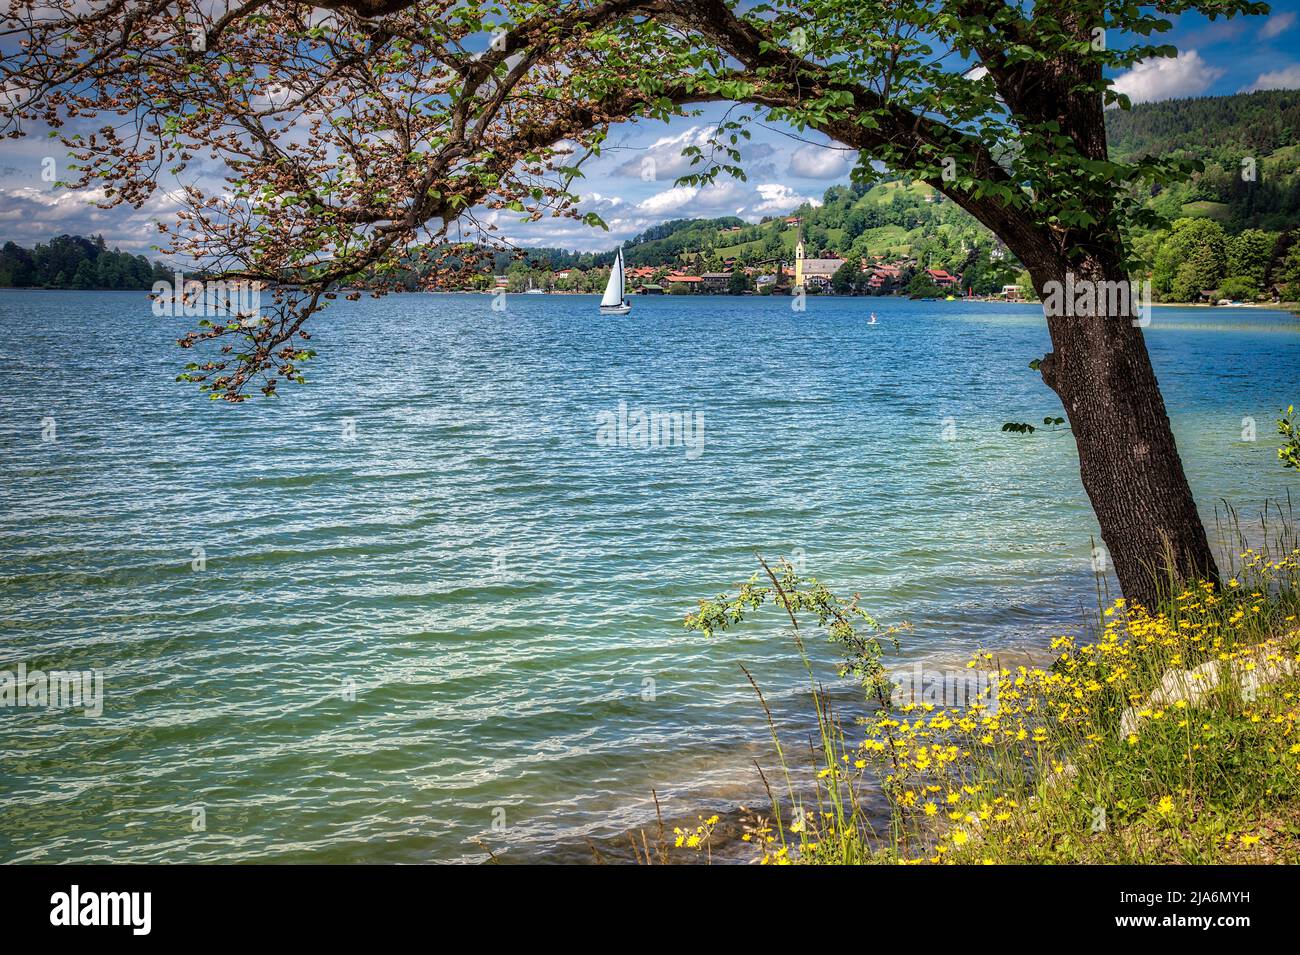 DE - BAVARIA: Lake and town Schliersee in the Bavarian Alps Stock Photo